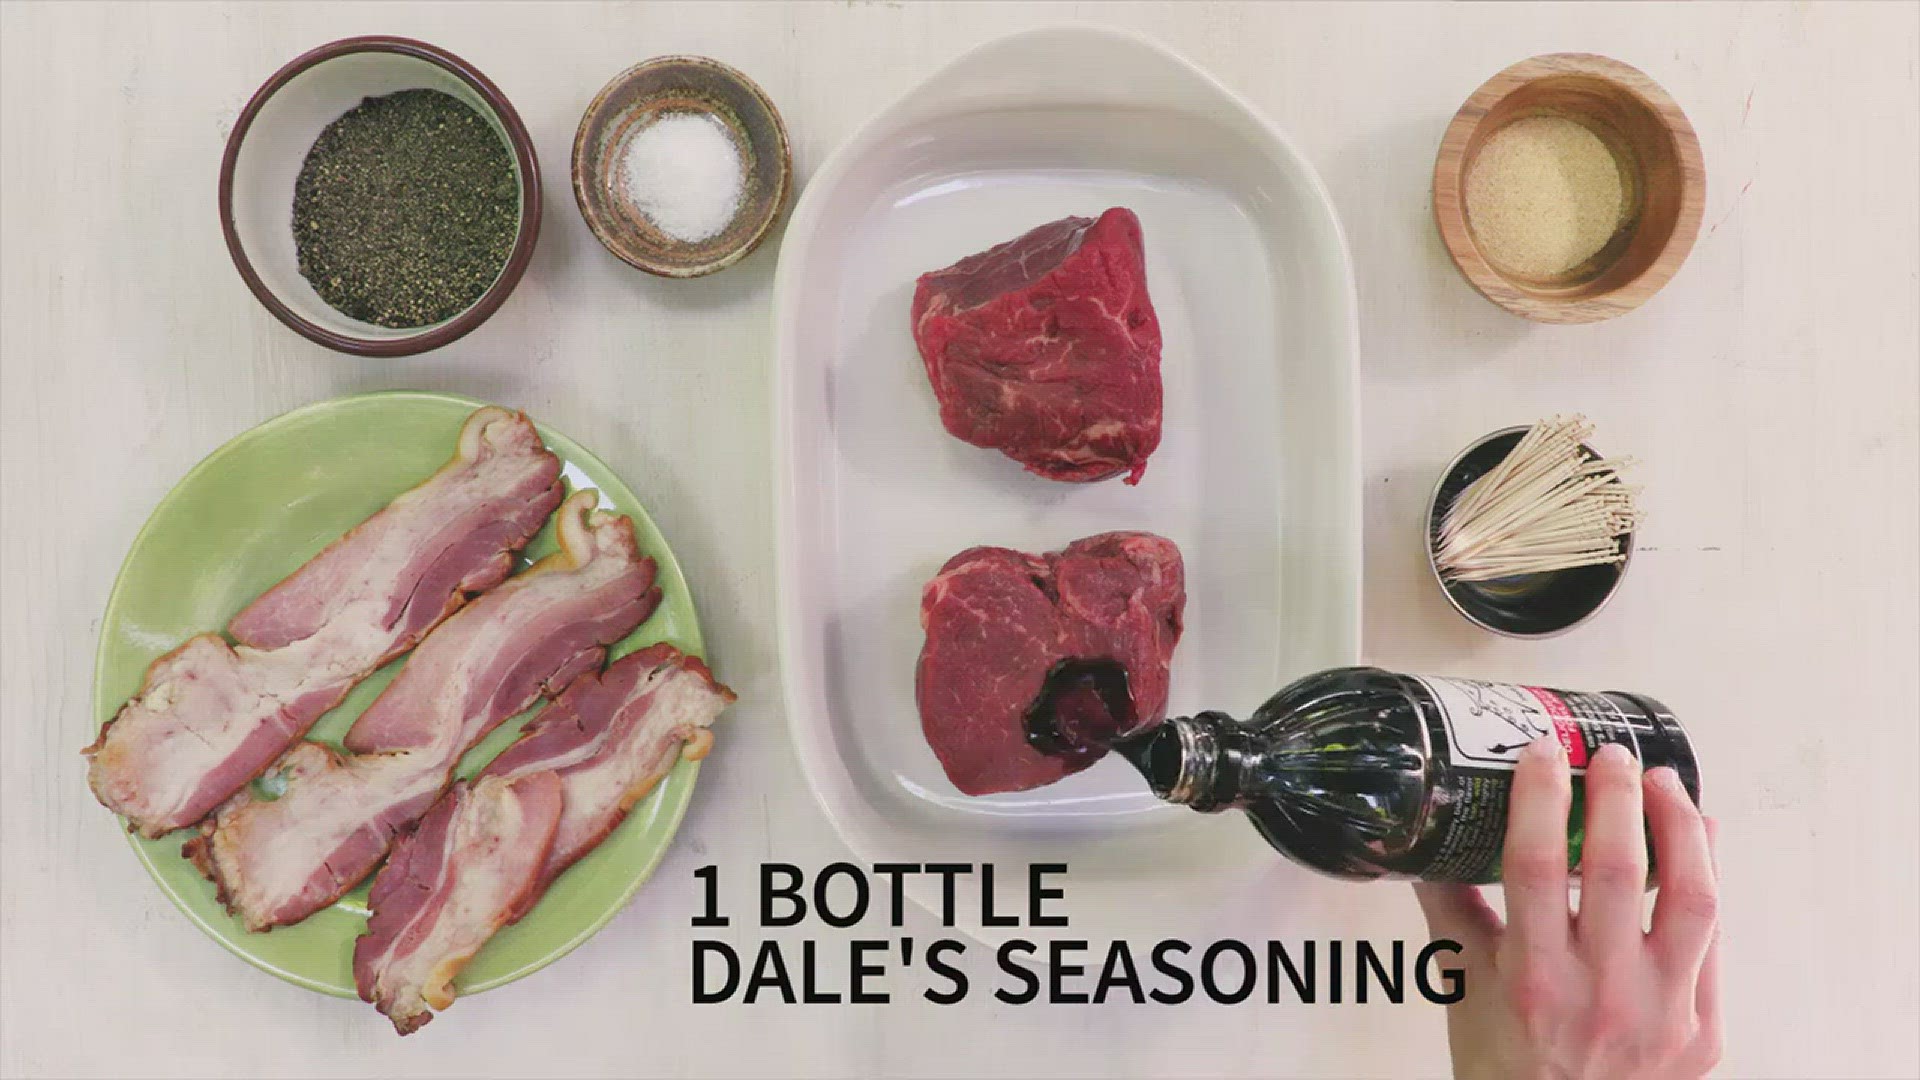 Try this sizzling summer recipe from Dale's Seasoning (sponsored post)